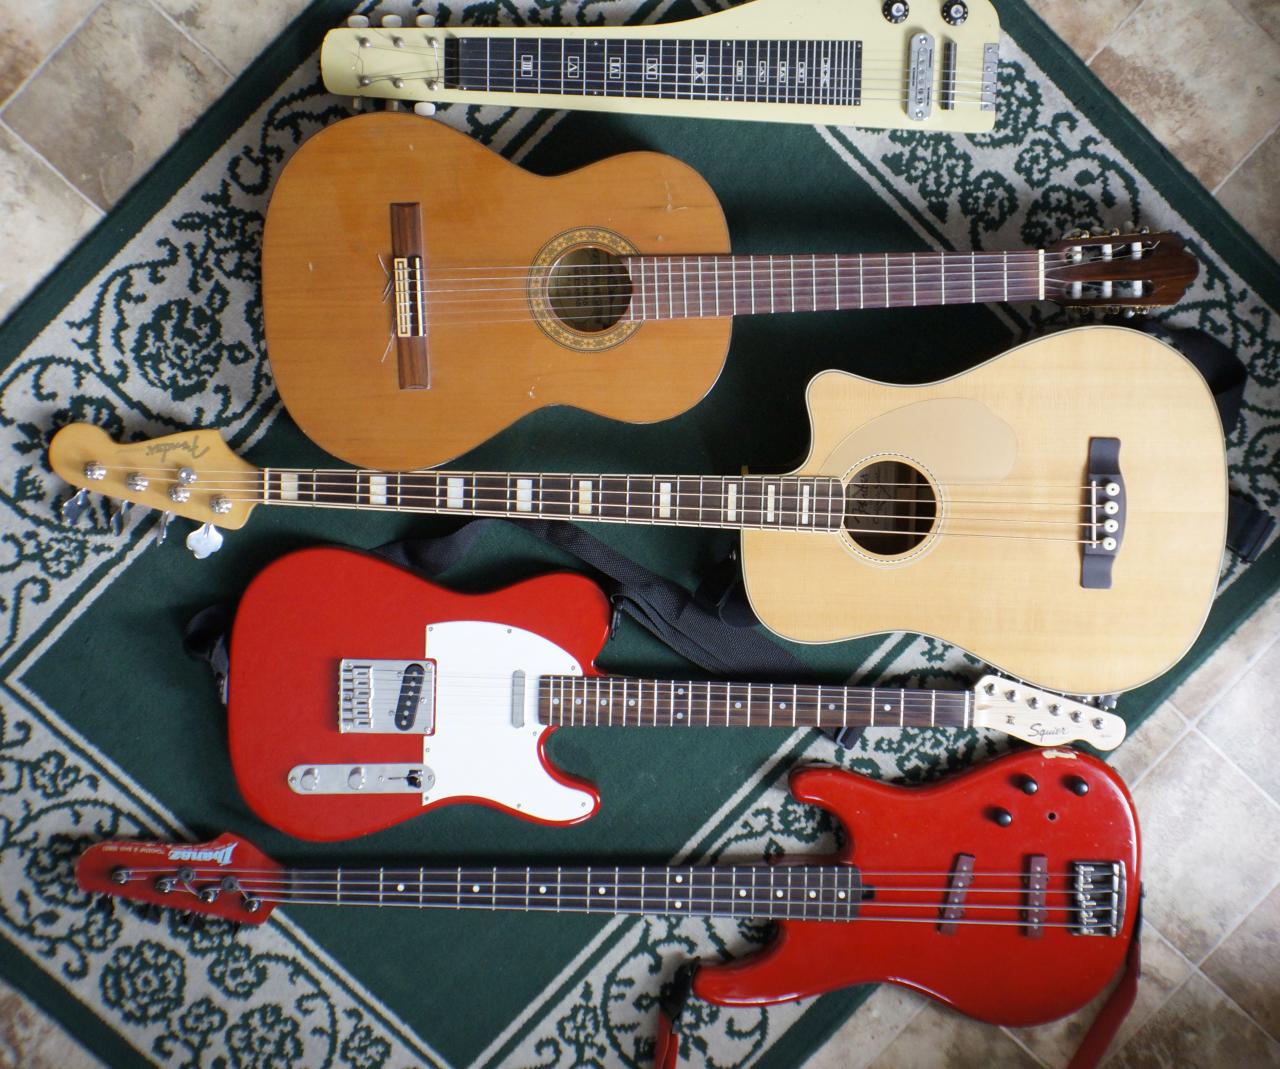 Guitars to practice: $5 yard sale lap steel, Fender Kingston bass, classical acoustic, Squier Telecaster, Ibanez bass